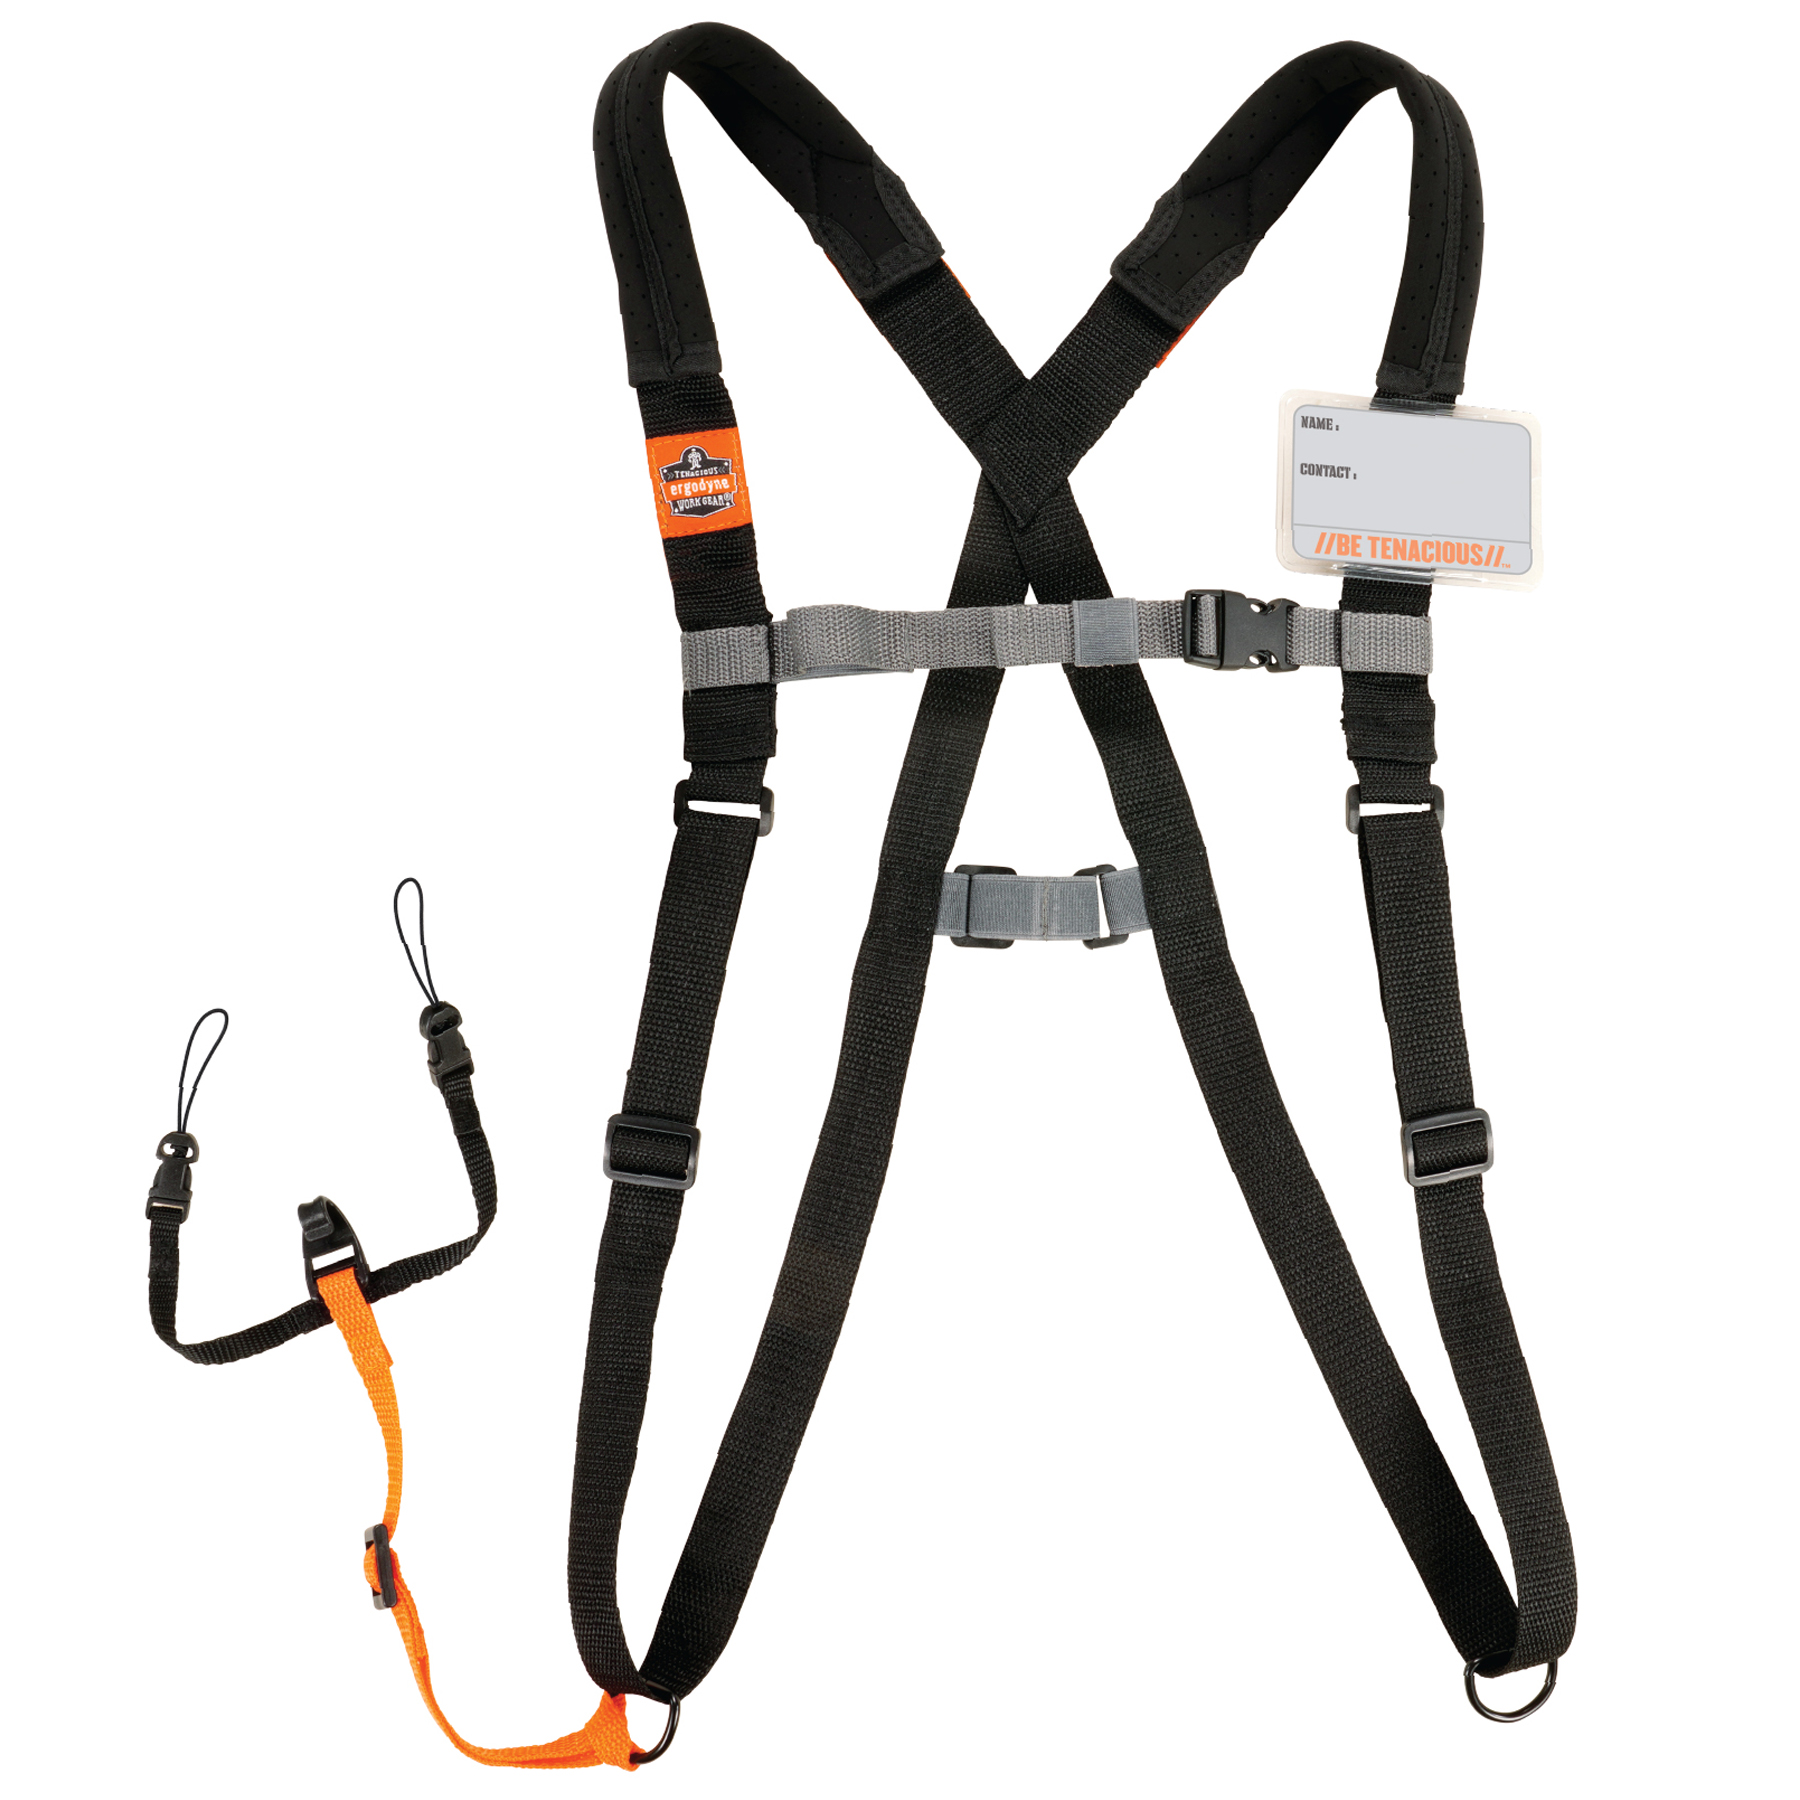 Squids 3138 Padded Barcode Scanner Harness + Lanyard